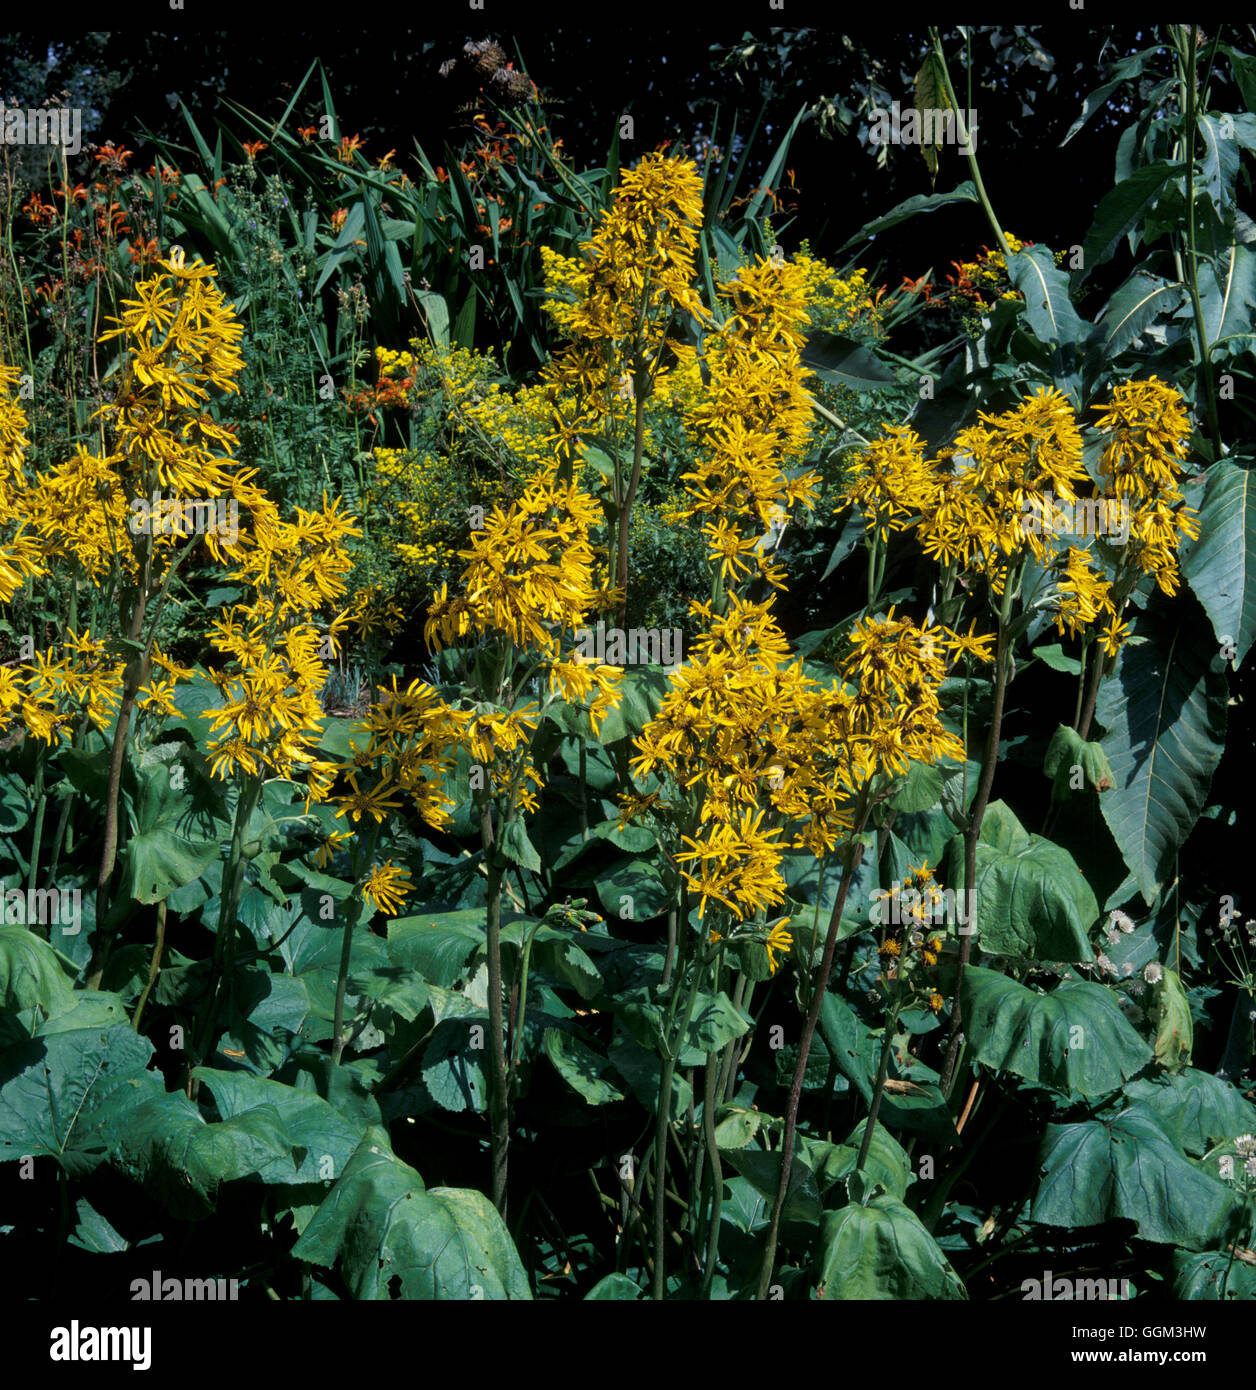 Drought  Ligularia 'Sungold' wilting through lack of water  Date: 20.06.08  PES038025   Photos Horti Stock Photo